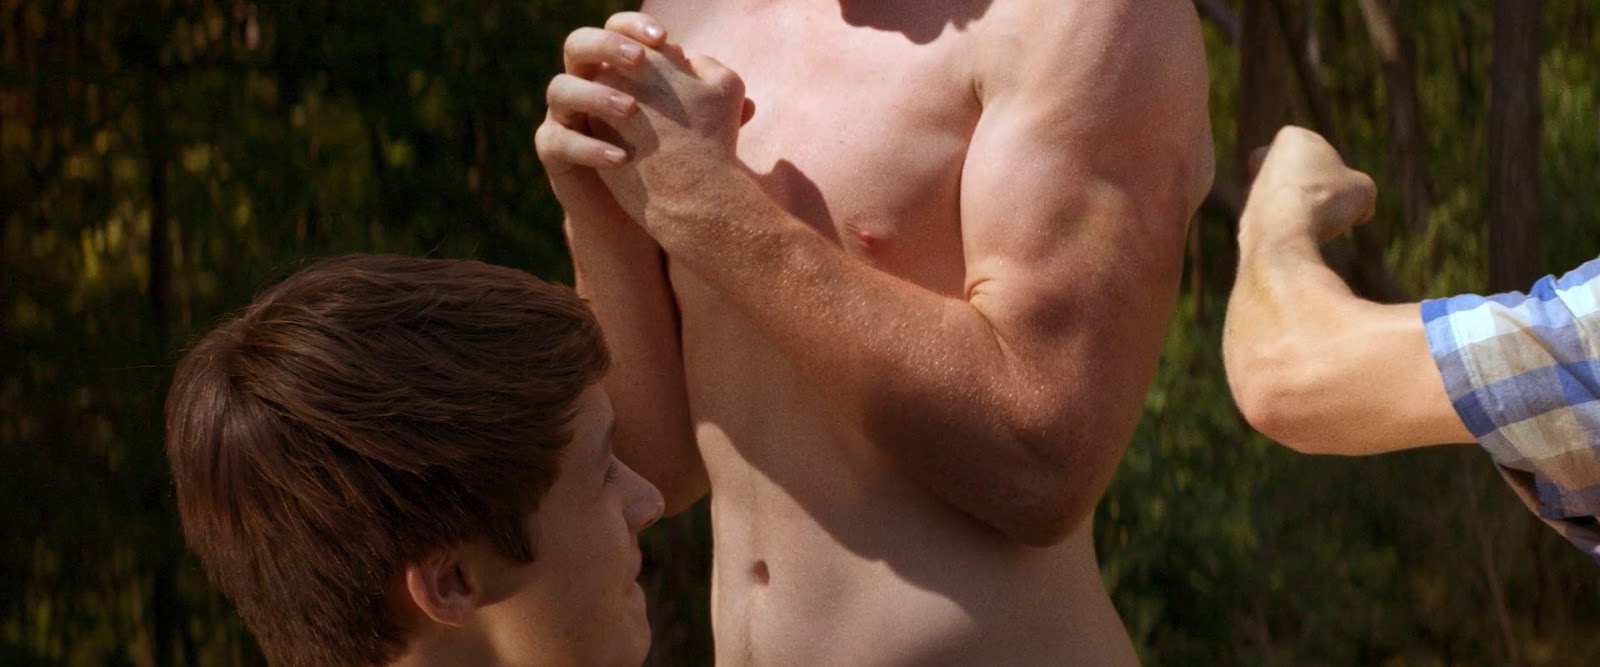 Gabriel Basso - Shirtless & Barefoot in "The Kings of Summer"...